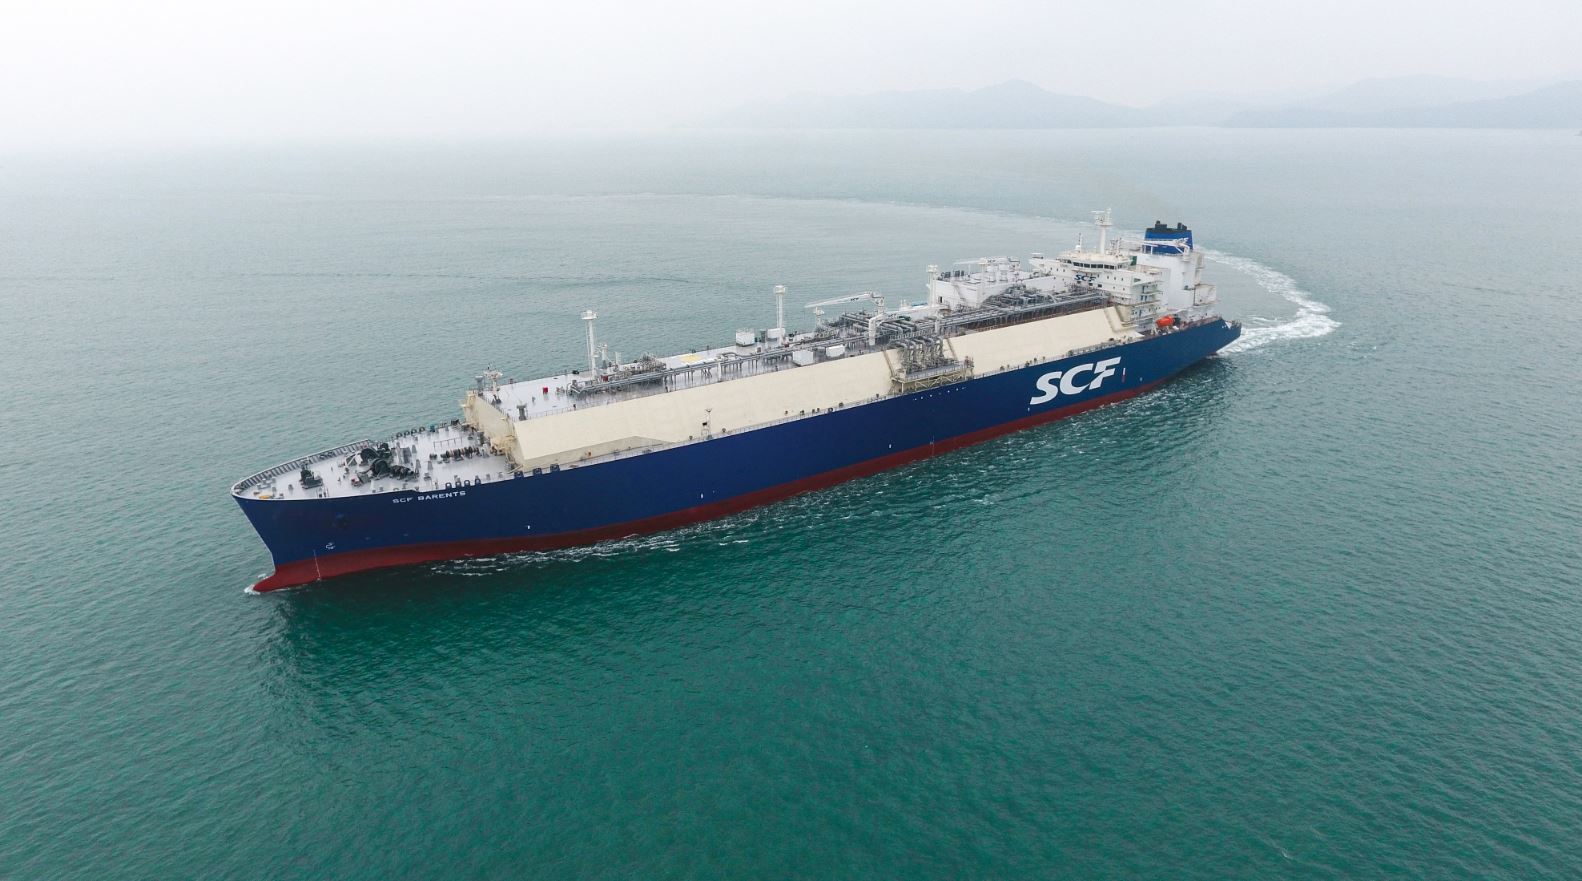 Eastern Pacific Shipping buys four Sovcomflot LNG carriers from Dutch bank